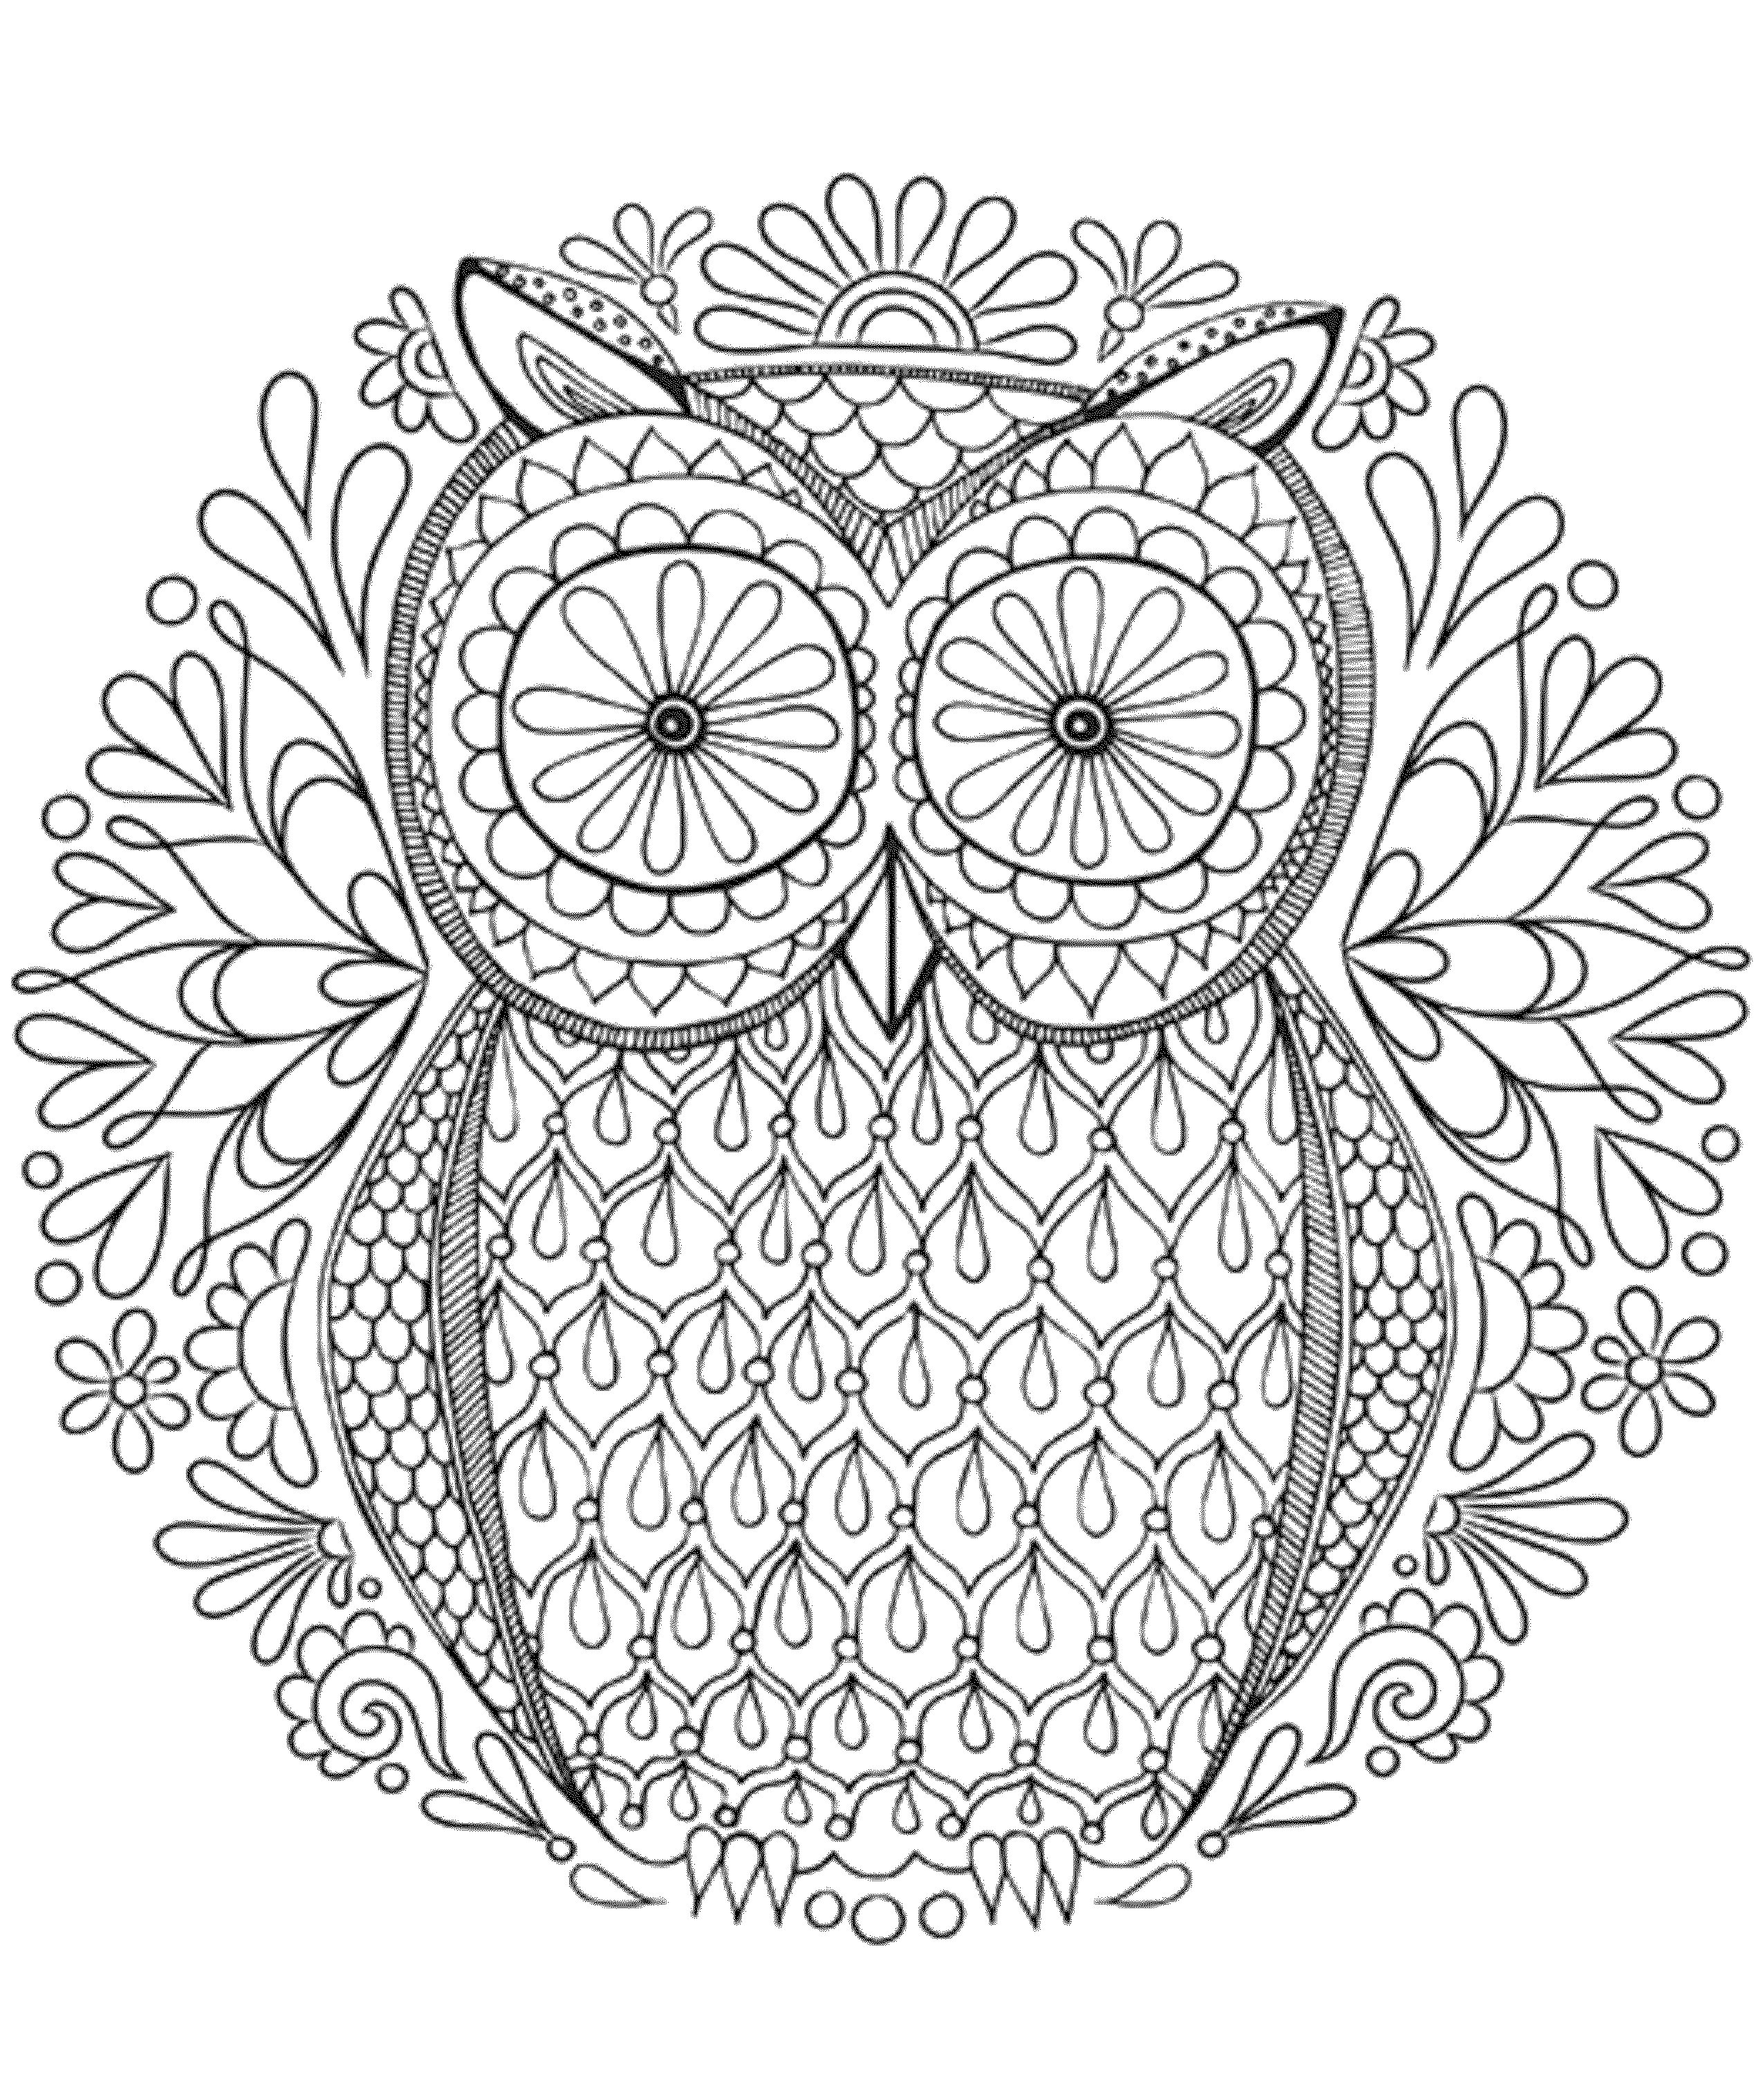 Owl Coloring Pages for Adults Hard - Printable Kids Colouring Pages